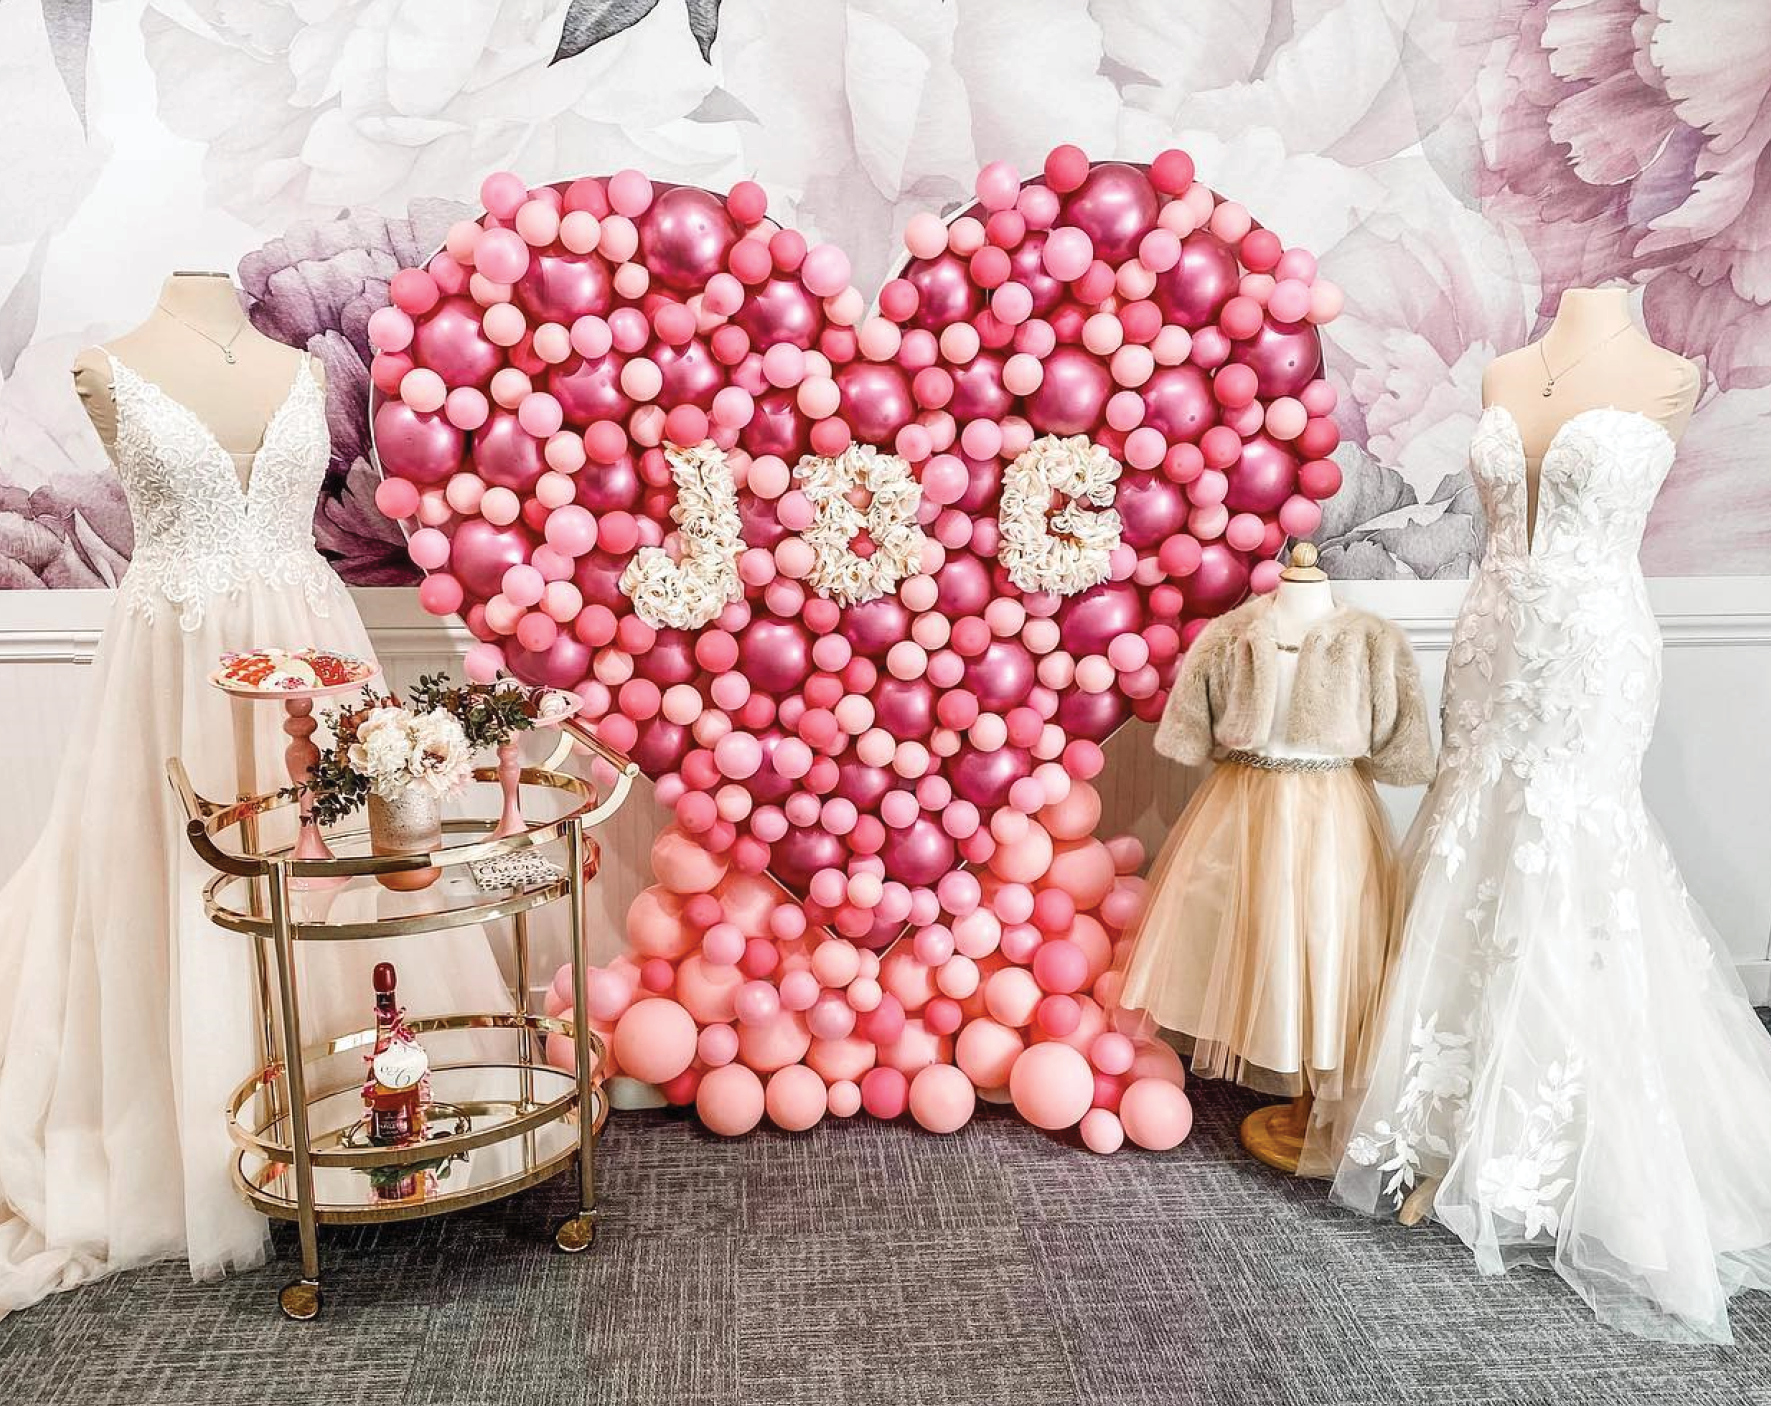 Bridal Boutique Window Display of Hearts